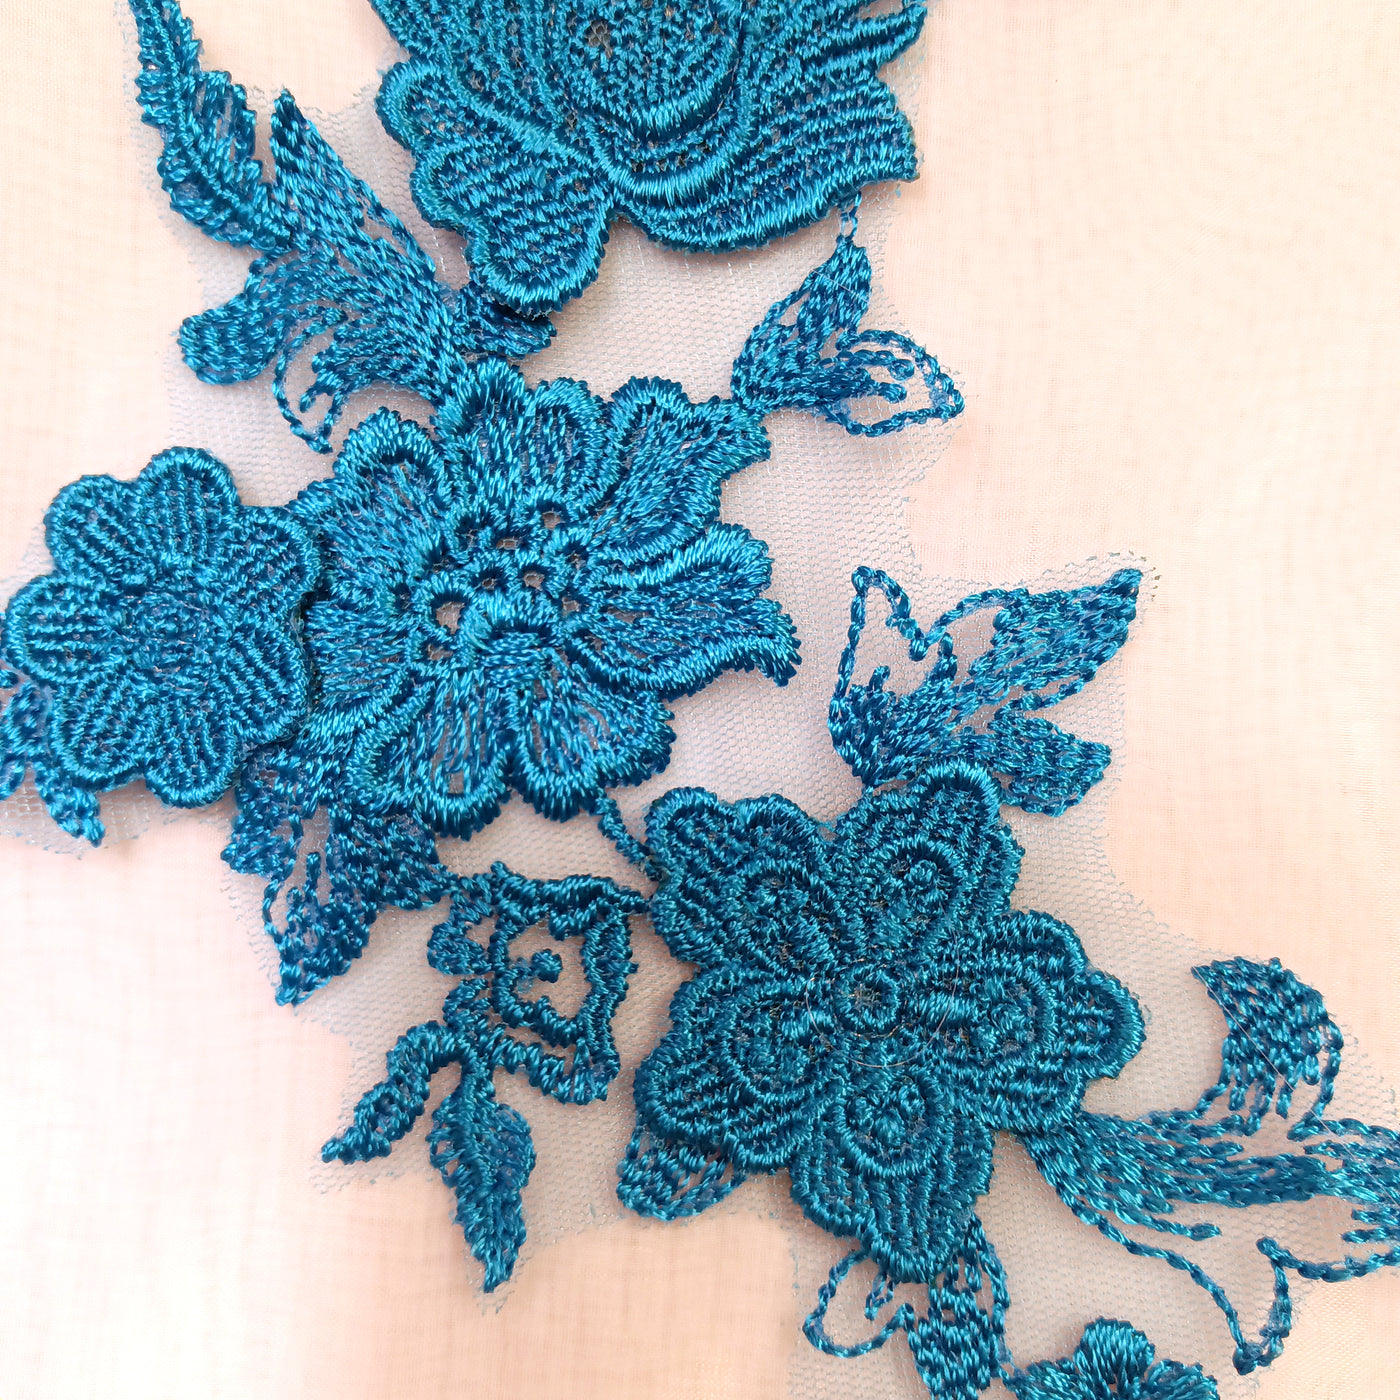 Embroidered Turquoise Applique with 3D Flowers on 100% Polyester Net Mesh.